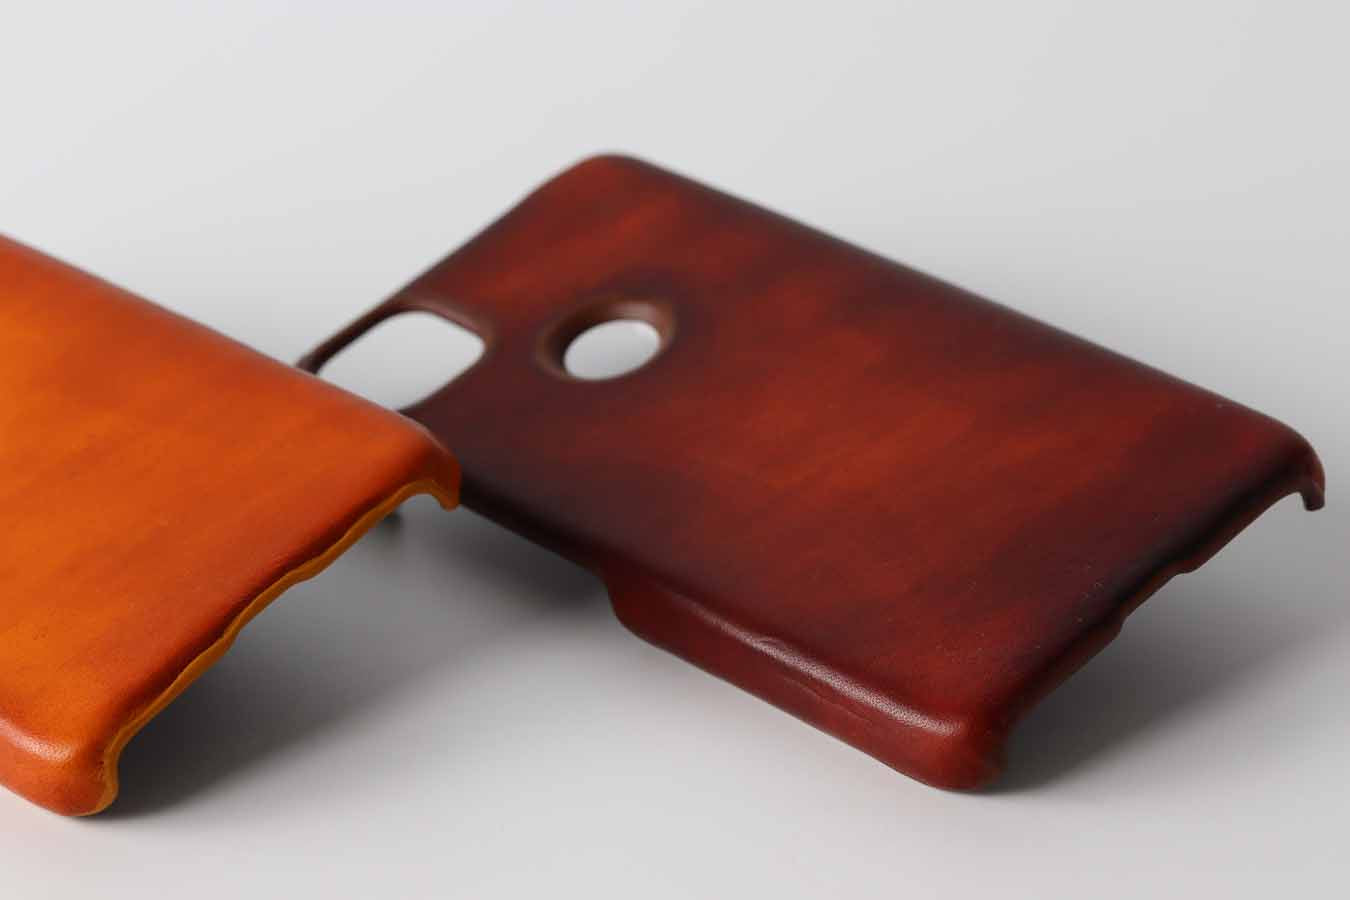 Patina on Kaseta leather case for pixel 4 and pixel 4a